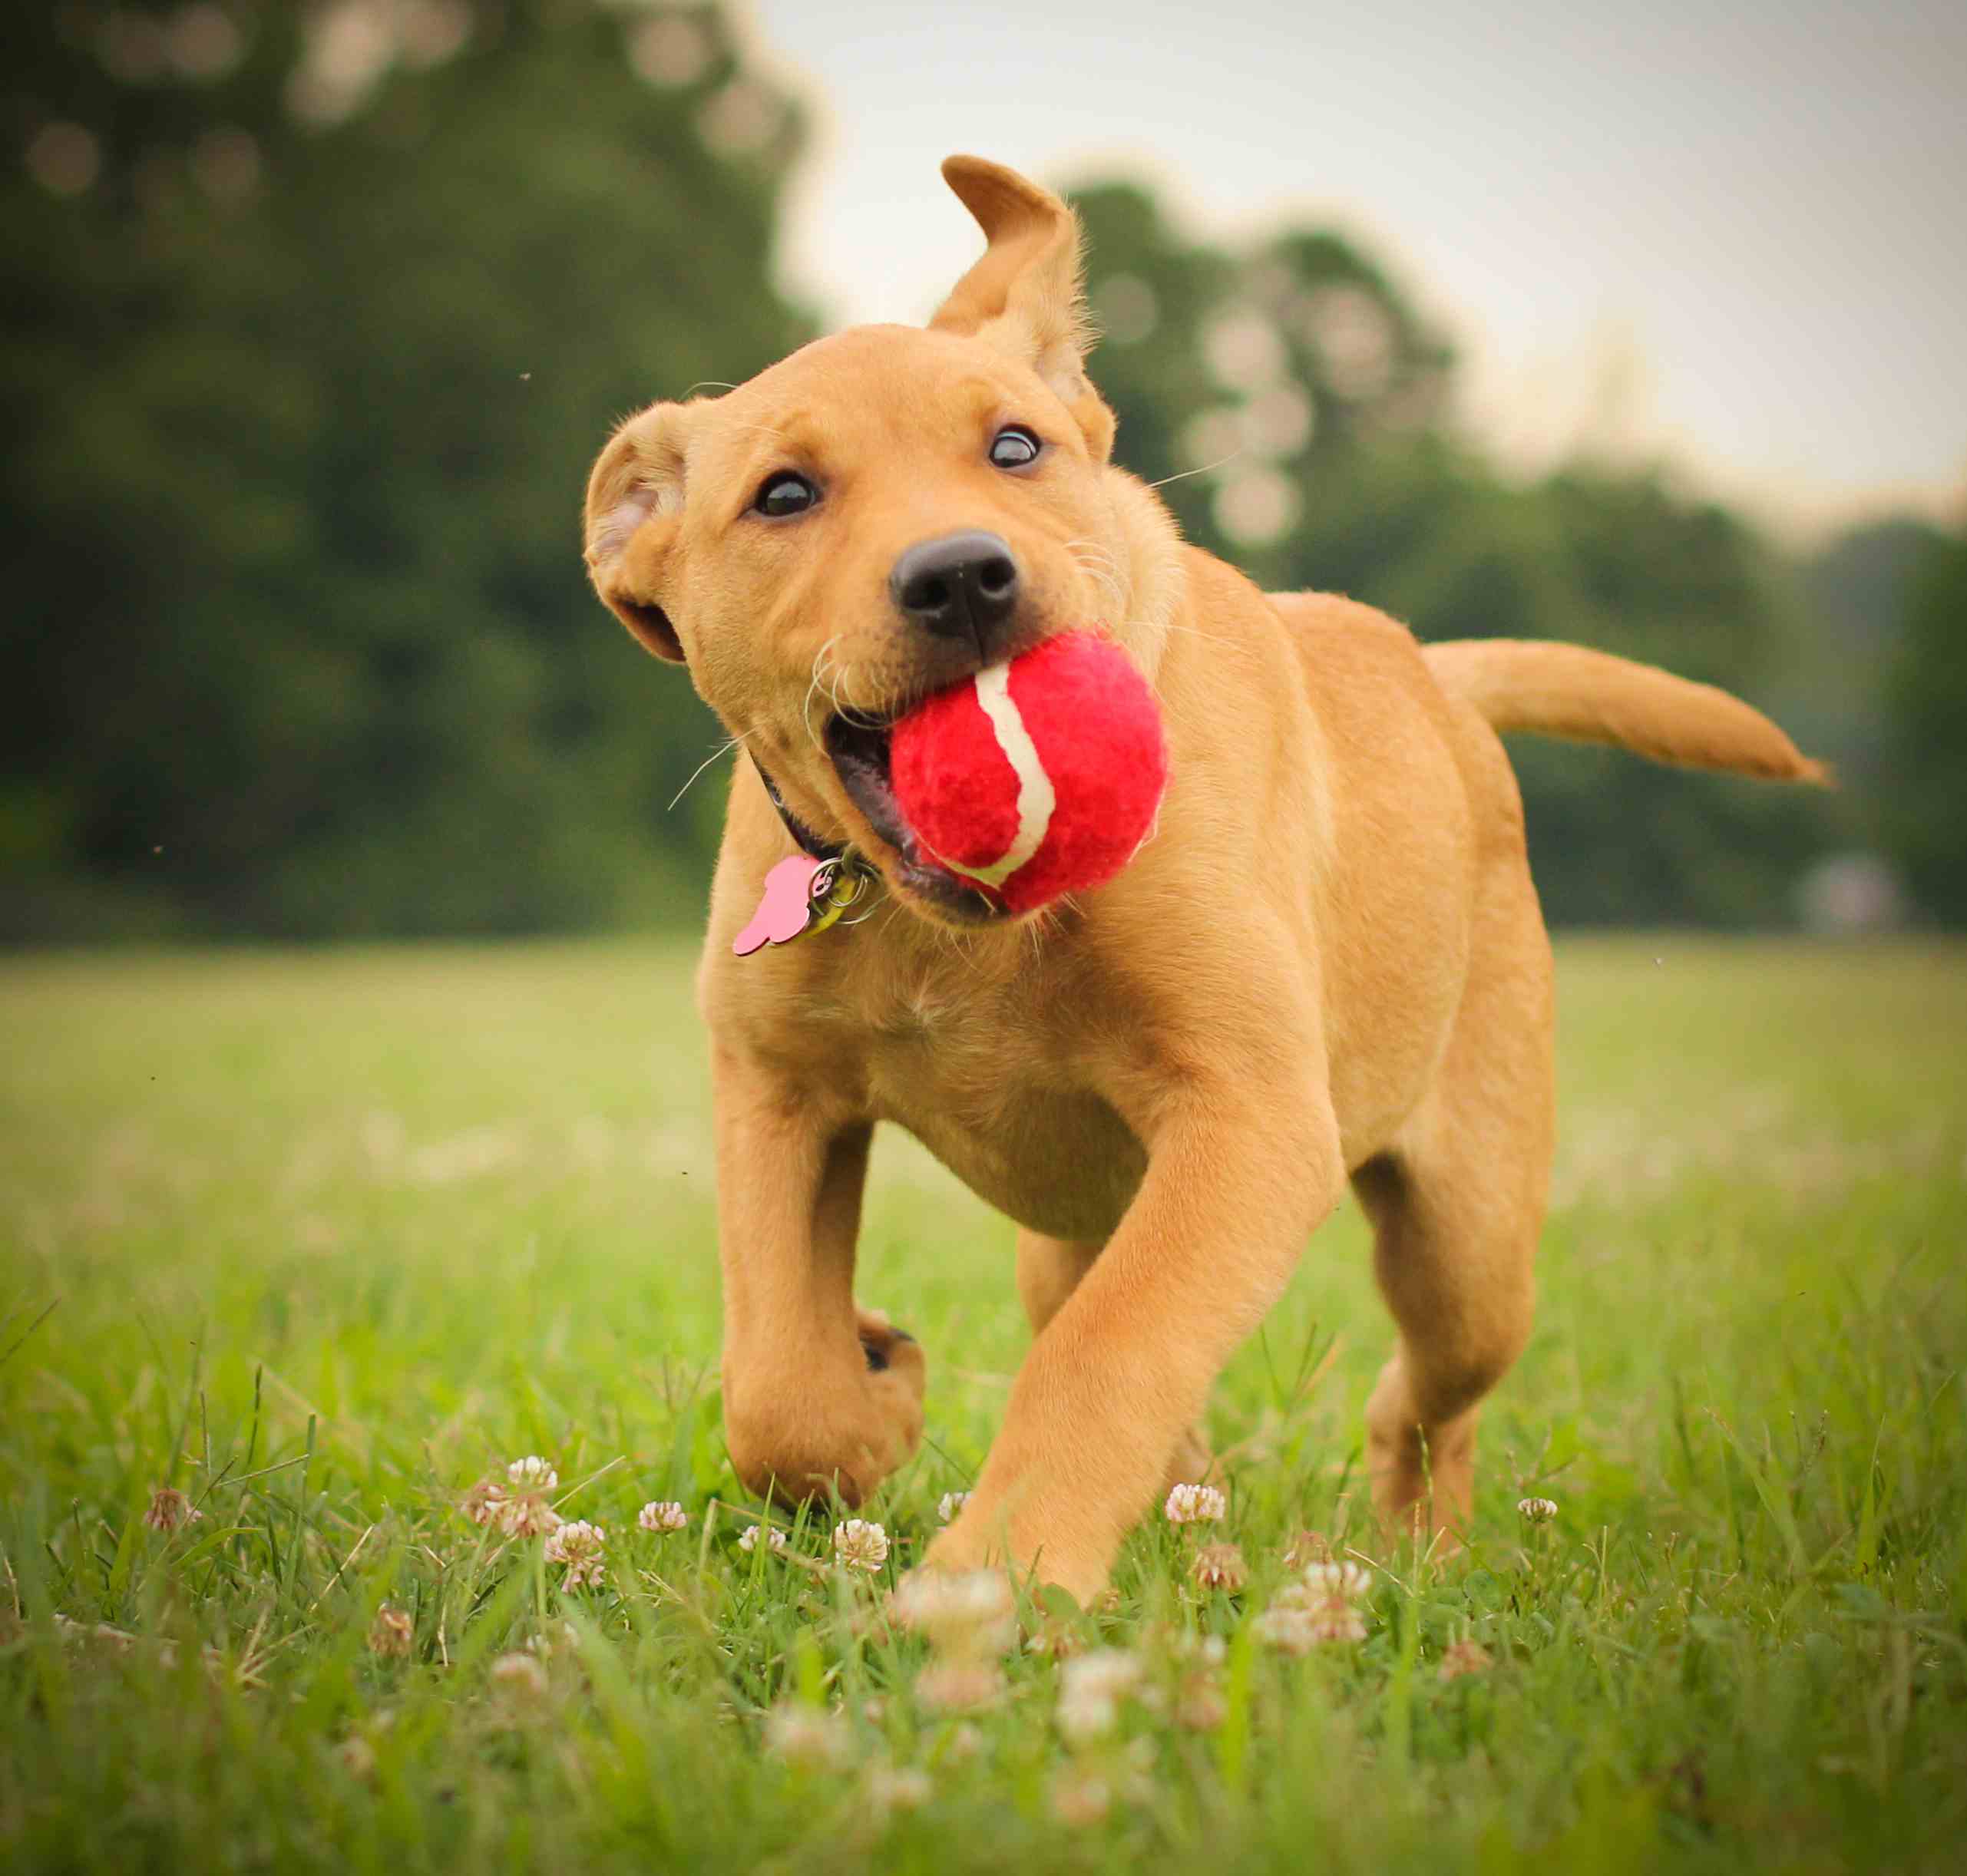 Labrabull puppy running with a red tennis ball in its mouth.